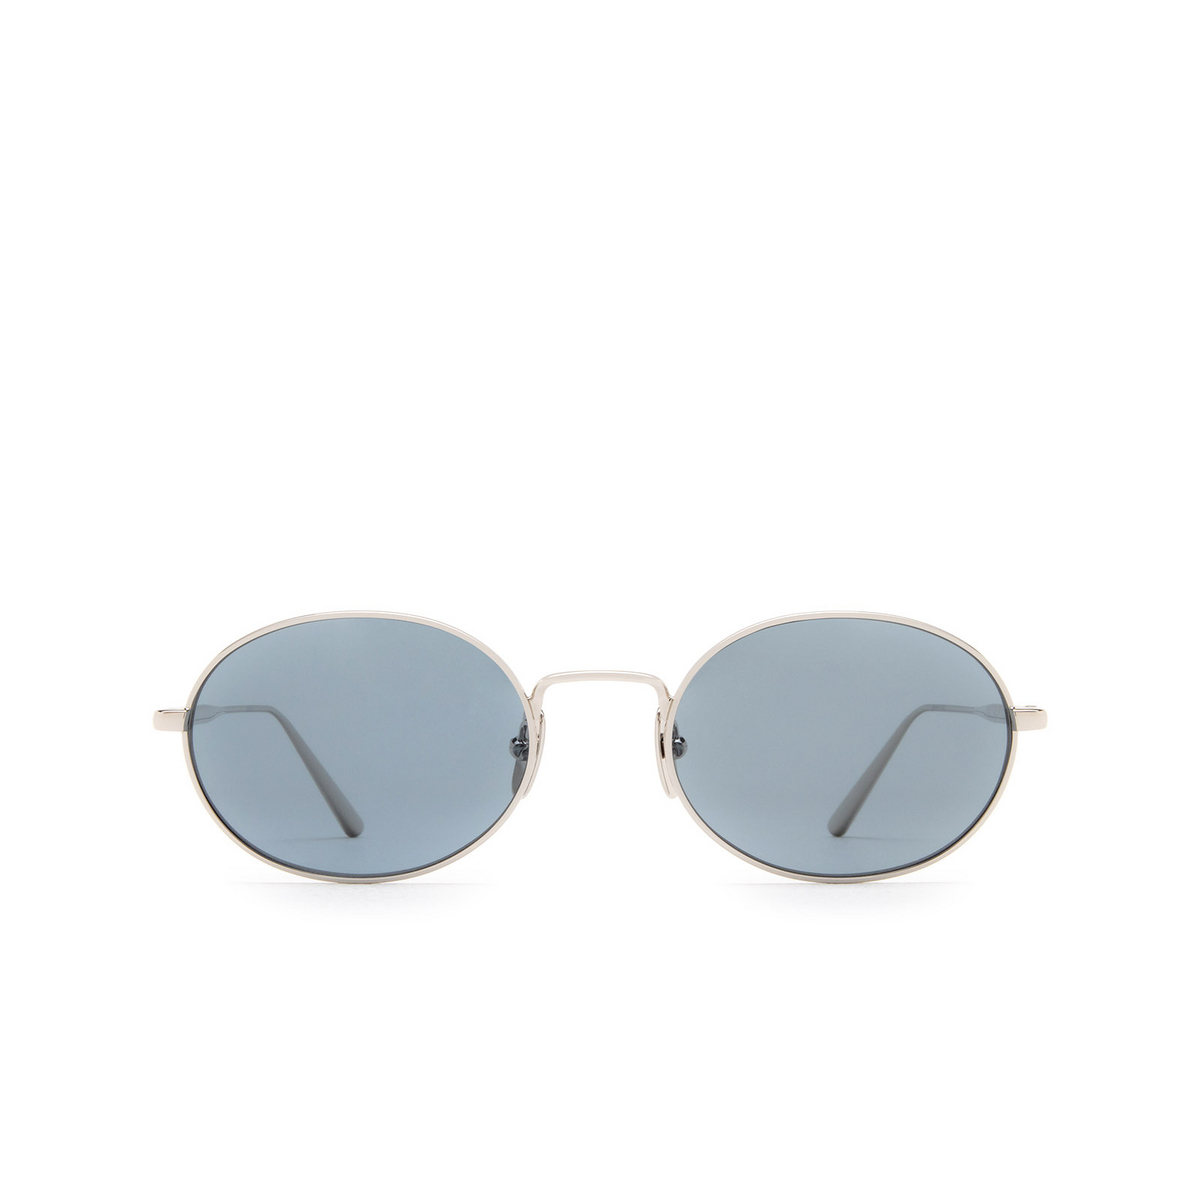 Chimi OVAL Sunglasses BLUE - front view